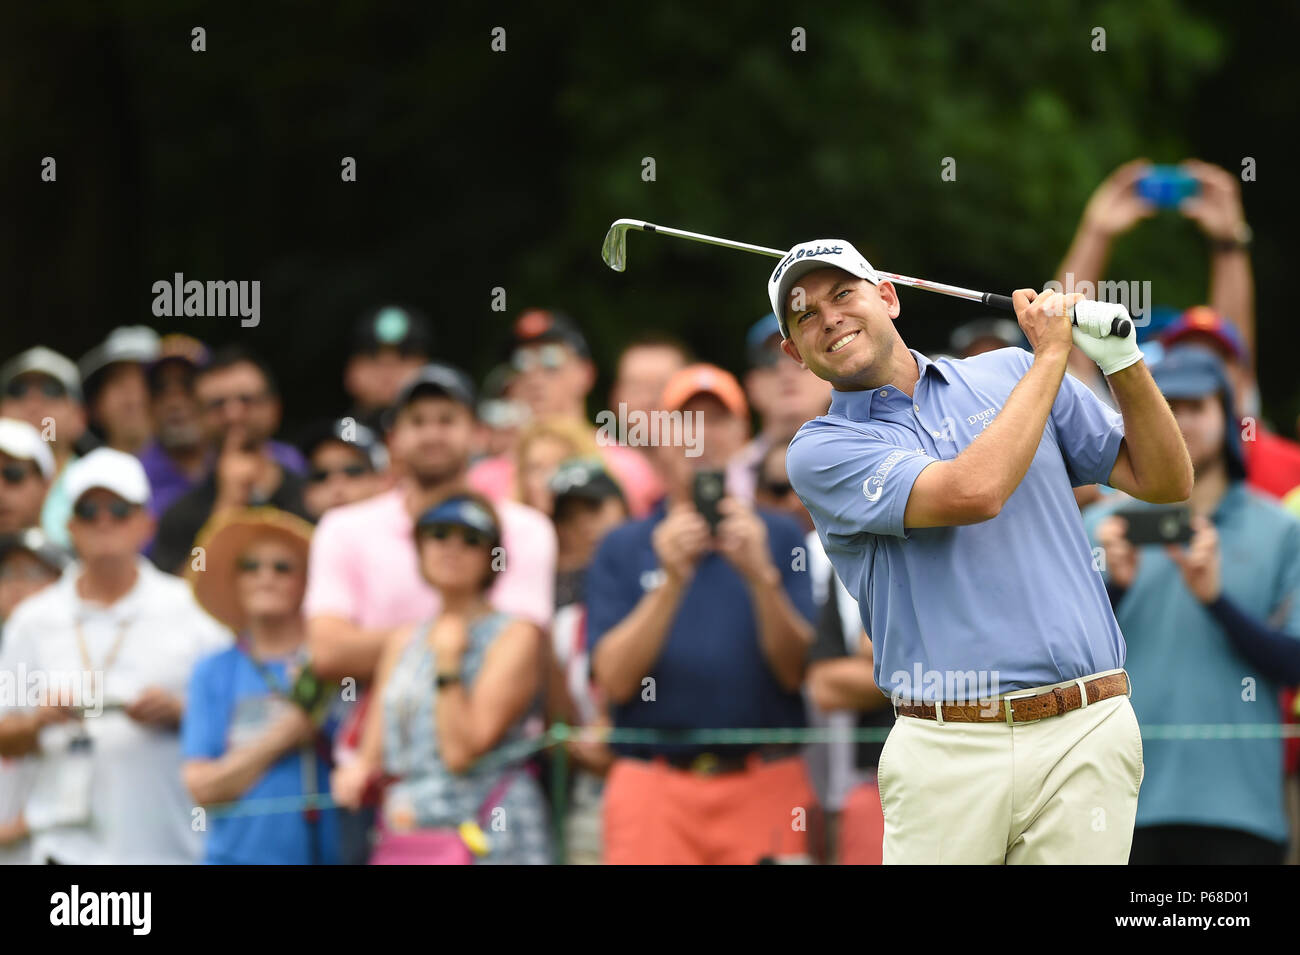 Potomac MD, USA. 28th June, 2018. Bill Haas (USA) tees off at the par three third hole during the opening round at the 2018 Quicken Loans National at the Tournament Players Club in Potomac MD. Credit: Cal Sport Media/Alamy Live News Stock Photo